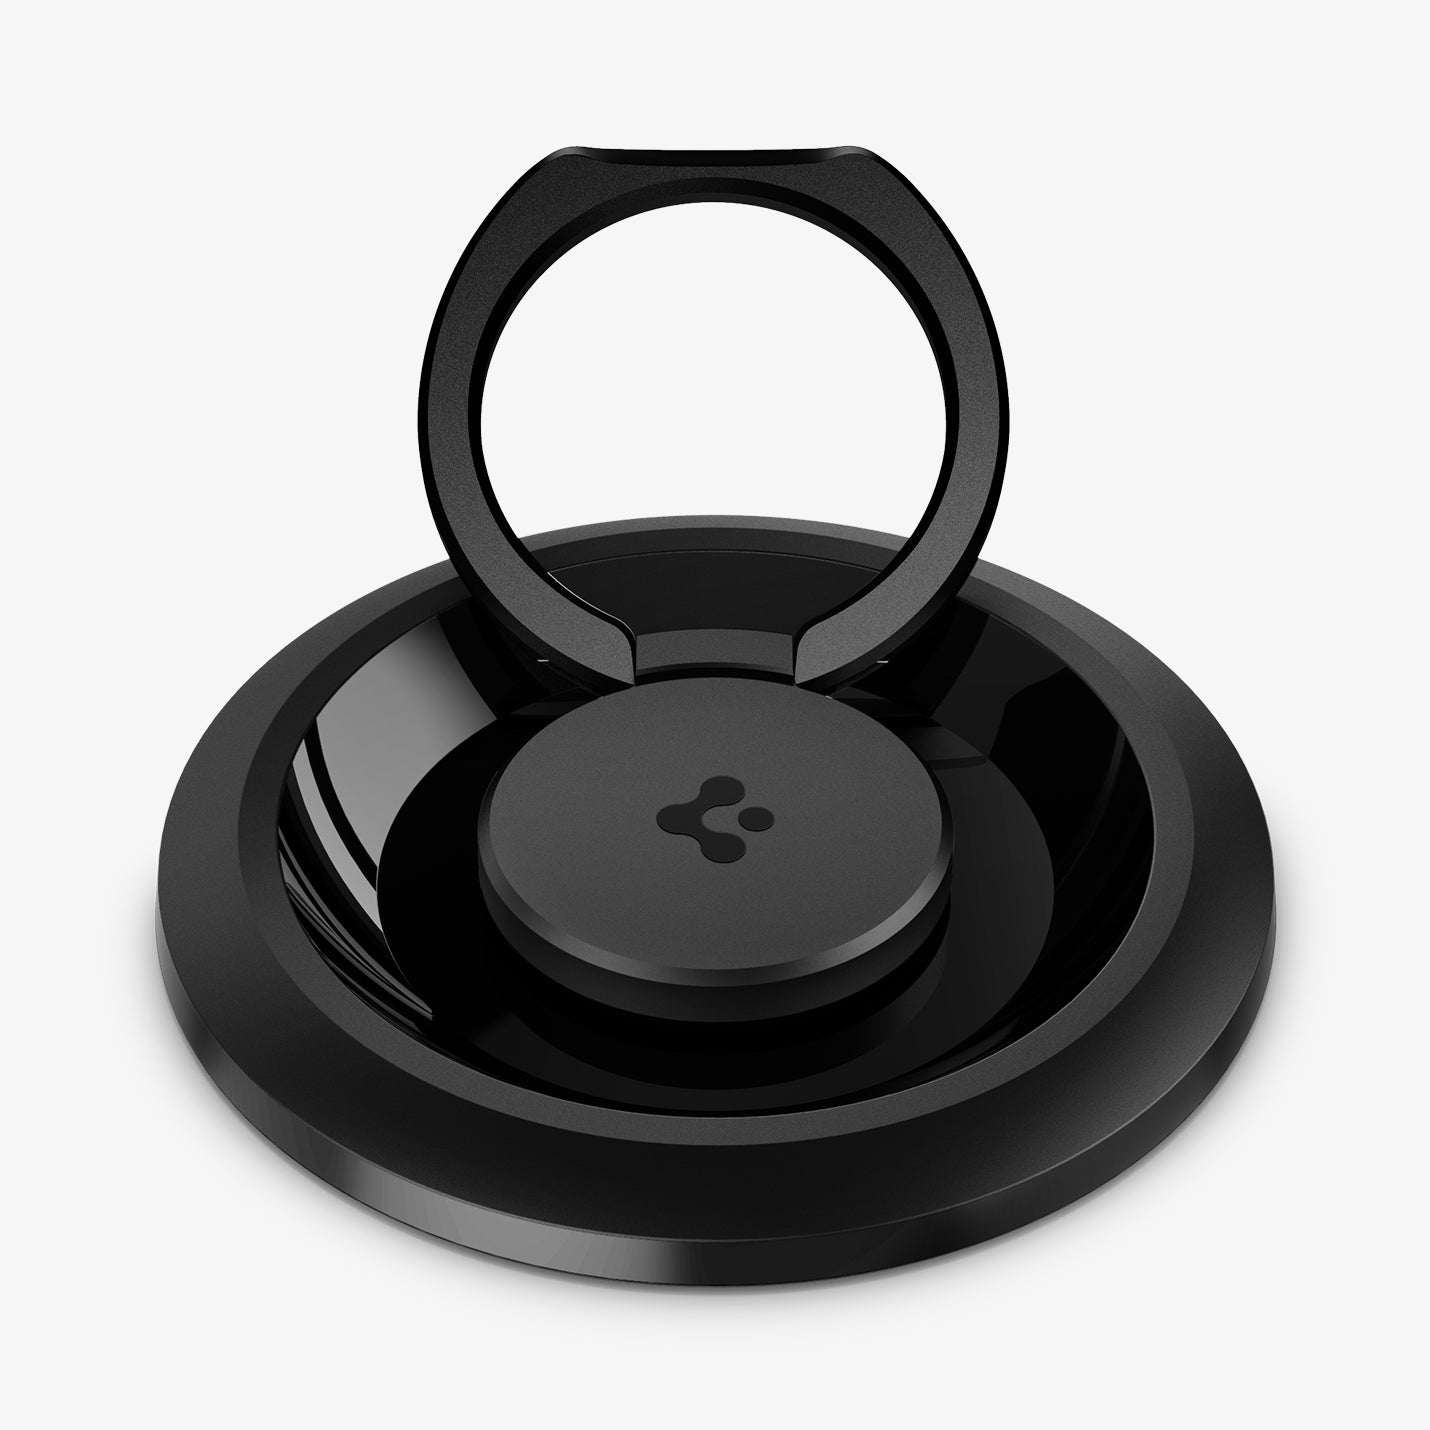 AMP03120 - O-Mag Magnetic Phone Holder (MagFit) in black showing the front and ring extended out laying flat